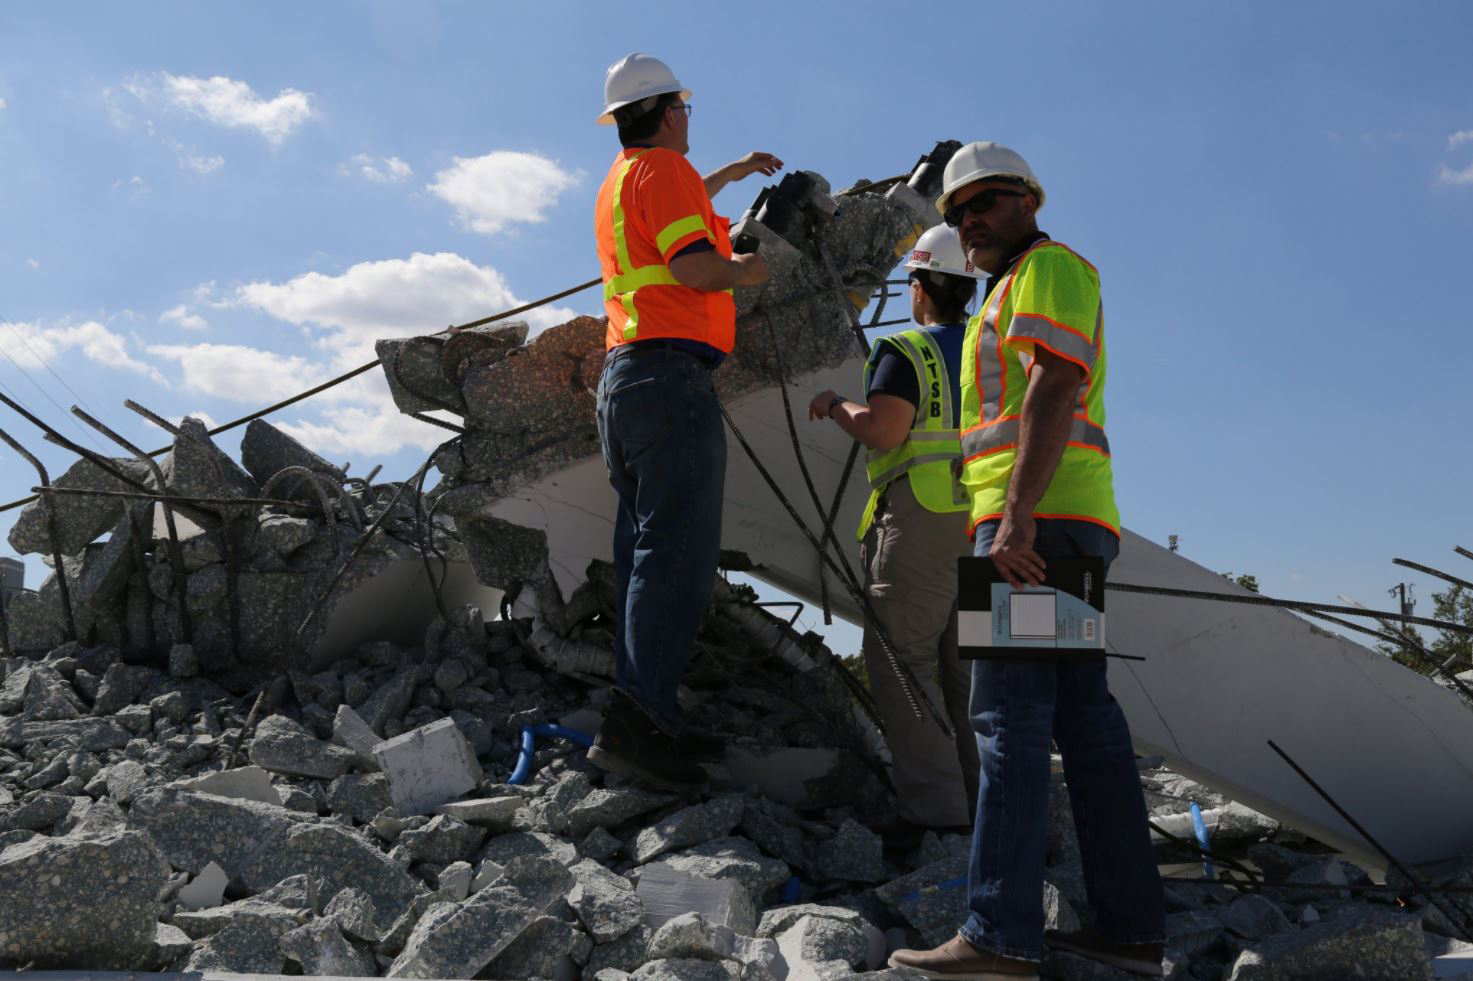 PHOTO: NTSB examine the debris from Thursday's collapse of a bridge on FIU's campus, March 16, 2018 in Miami.